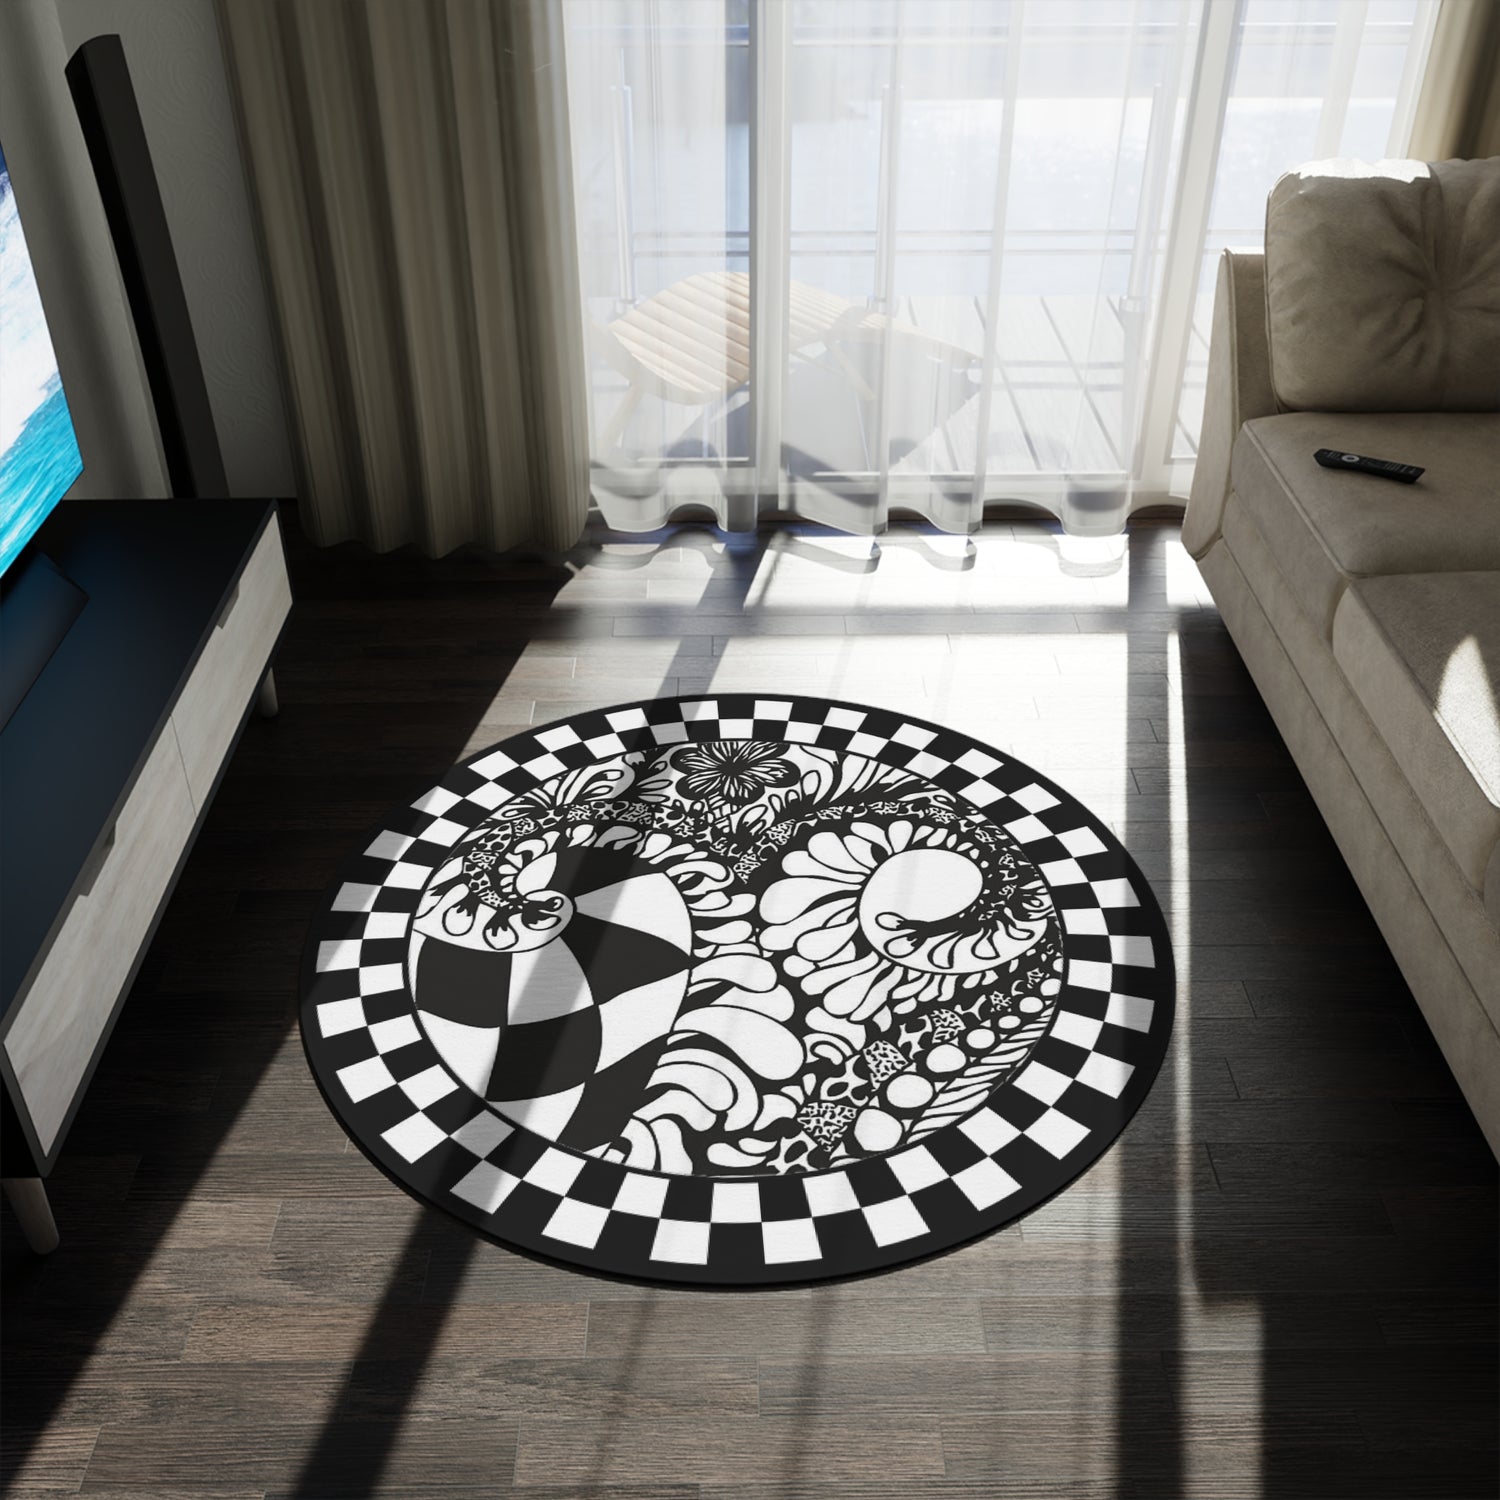 Round Rug Black and White artistic